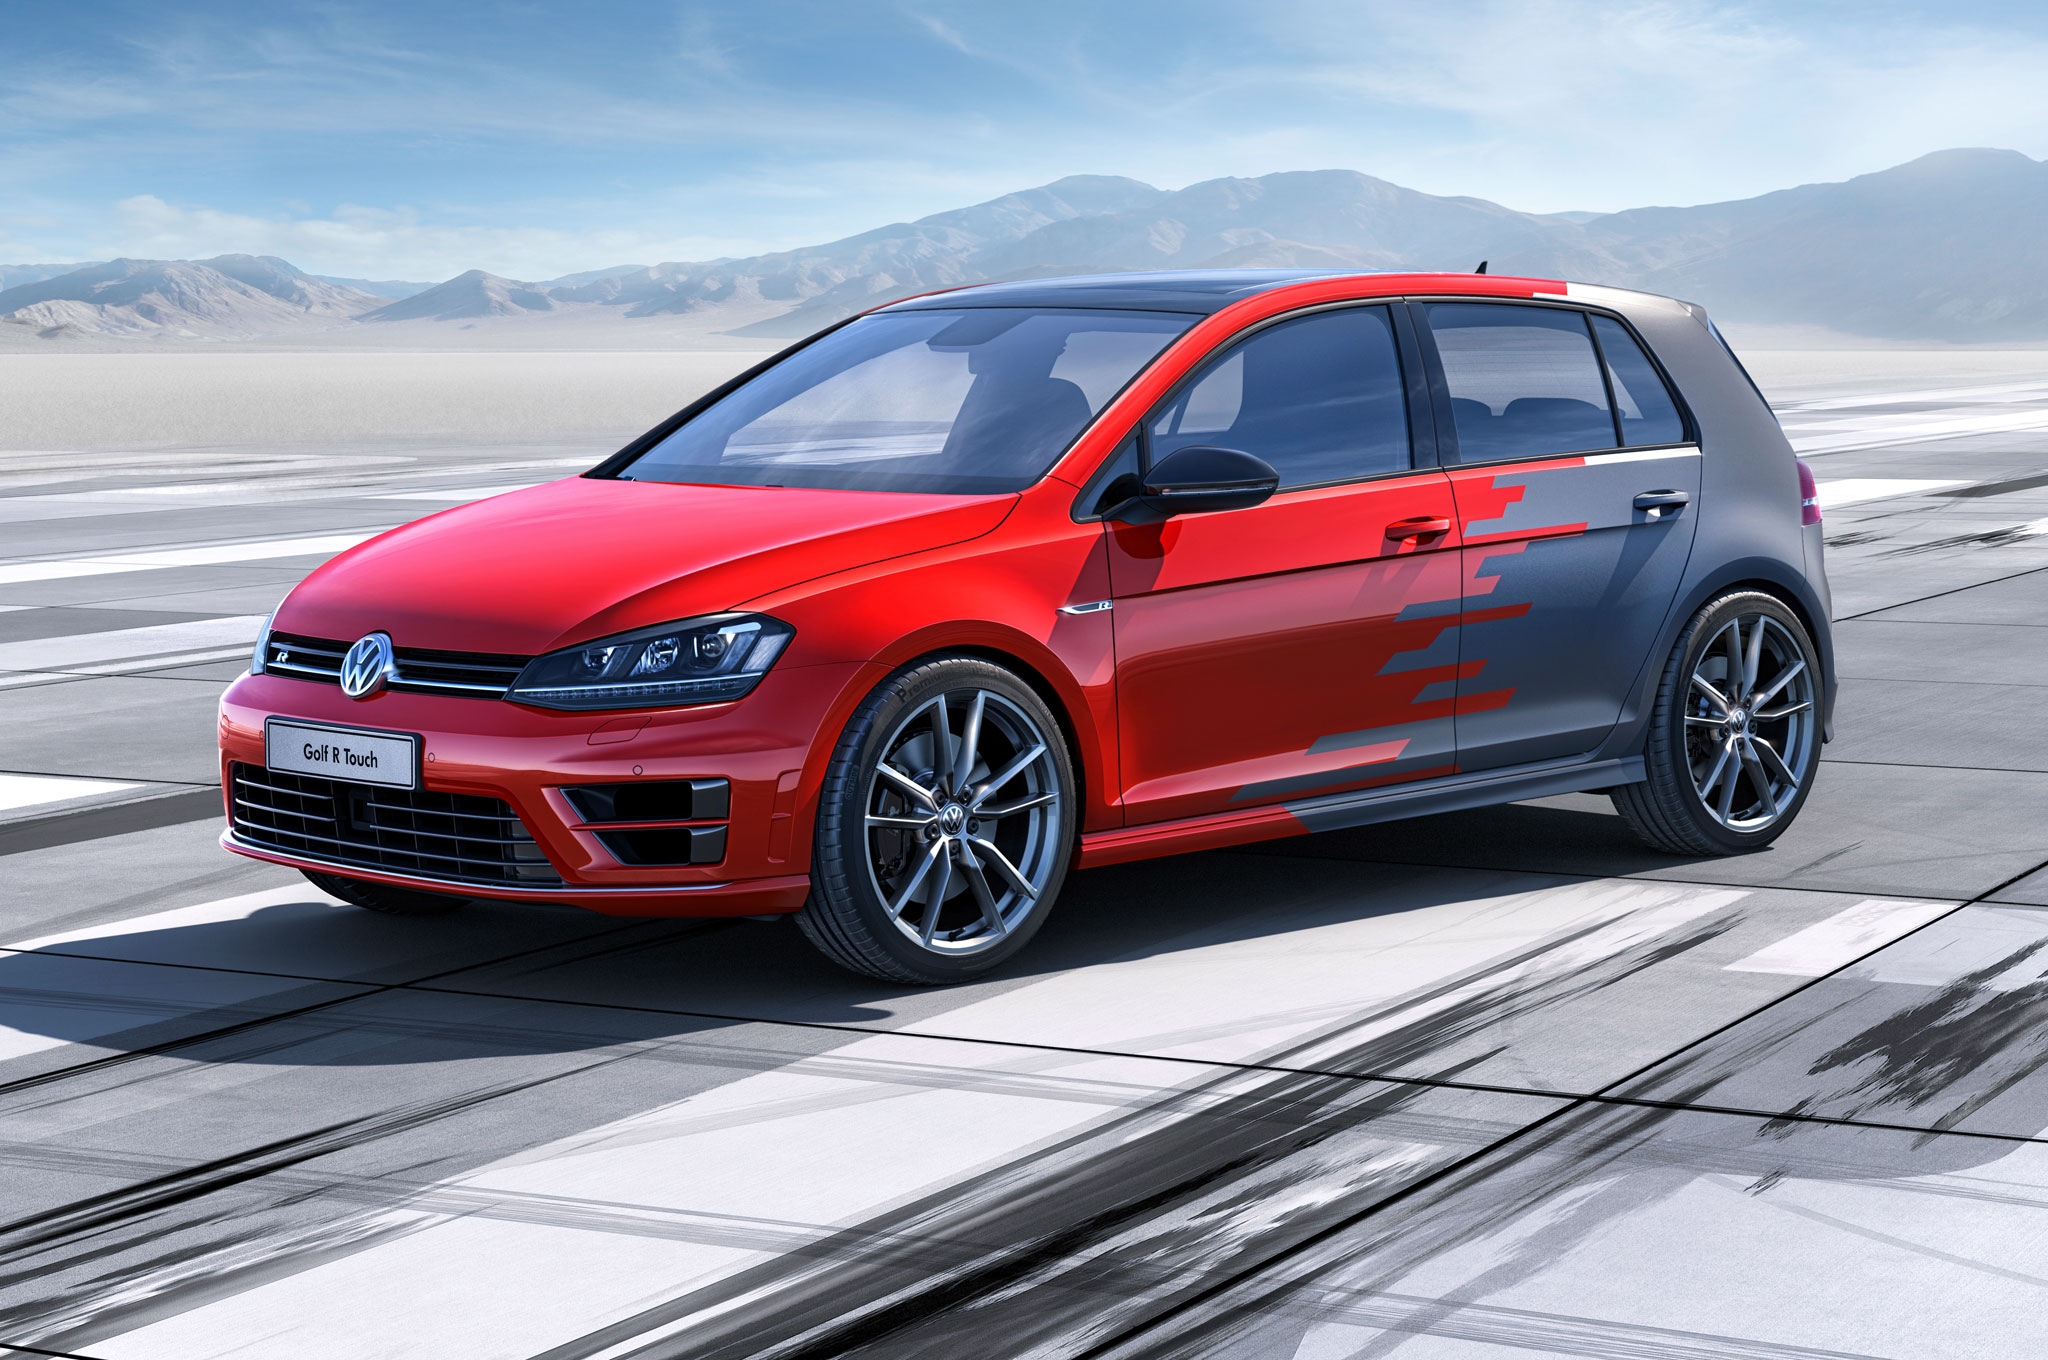 VW Golf R Touch screens and hand gestures replace buttons and dials